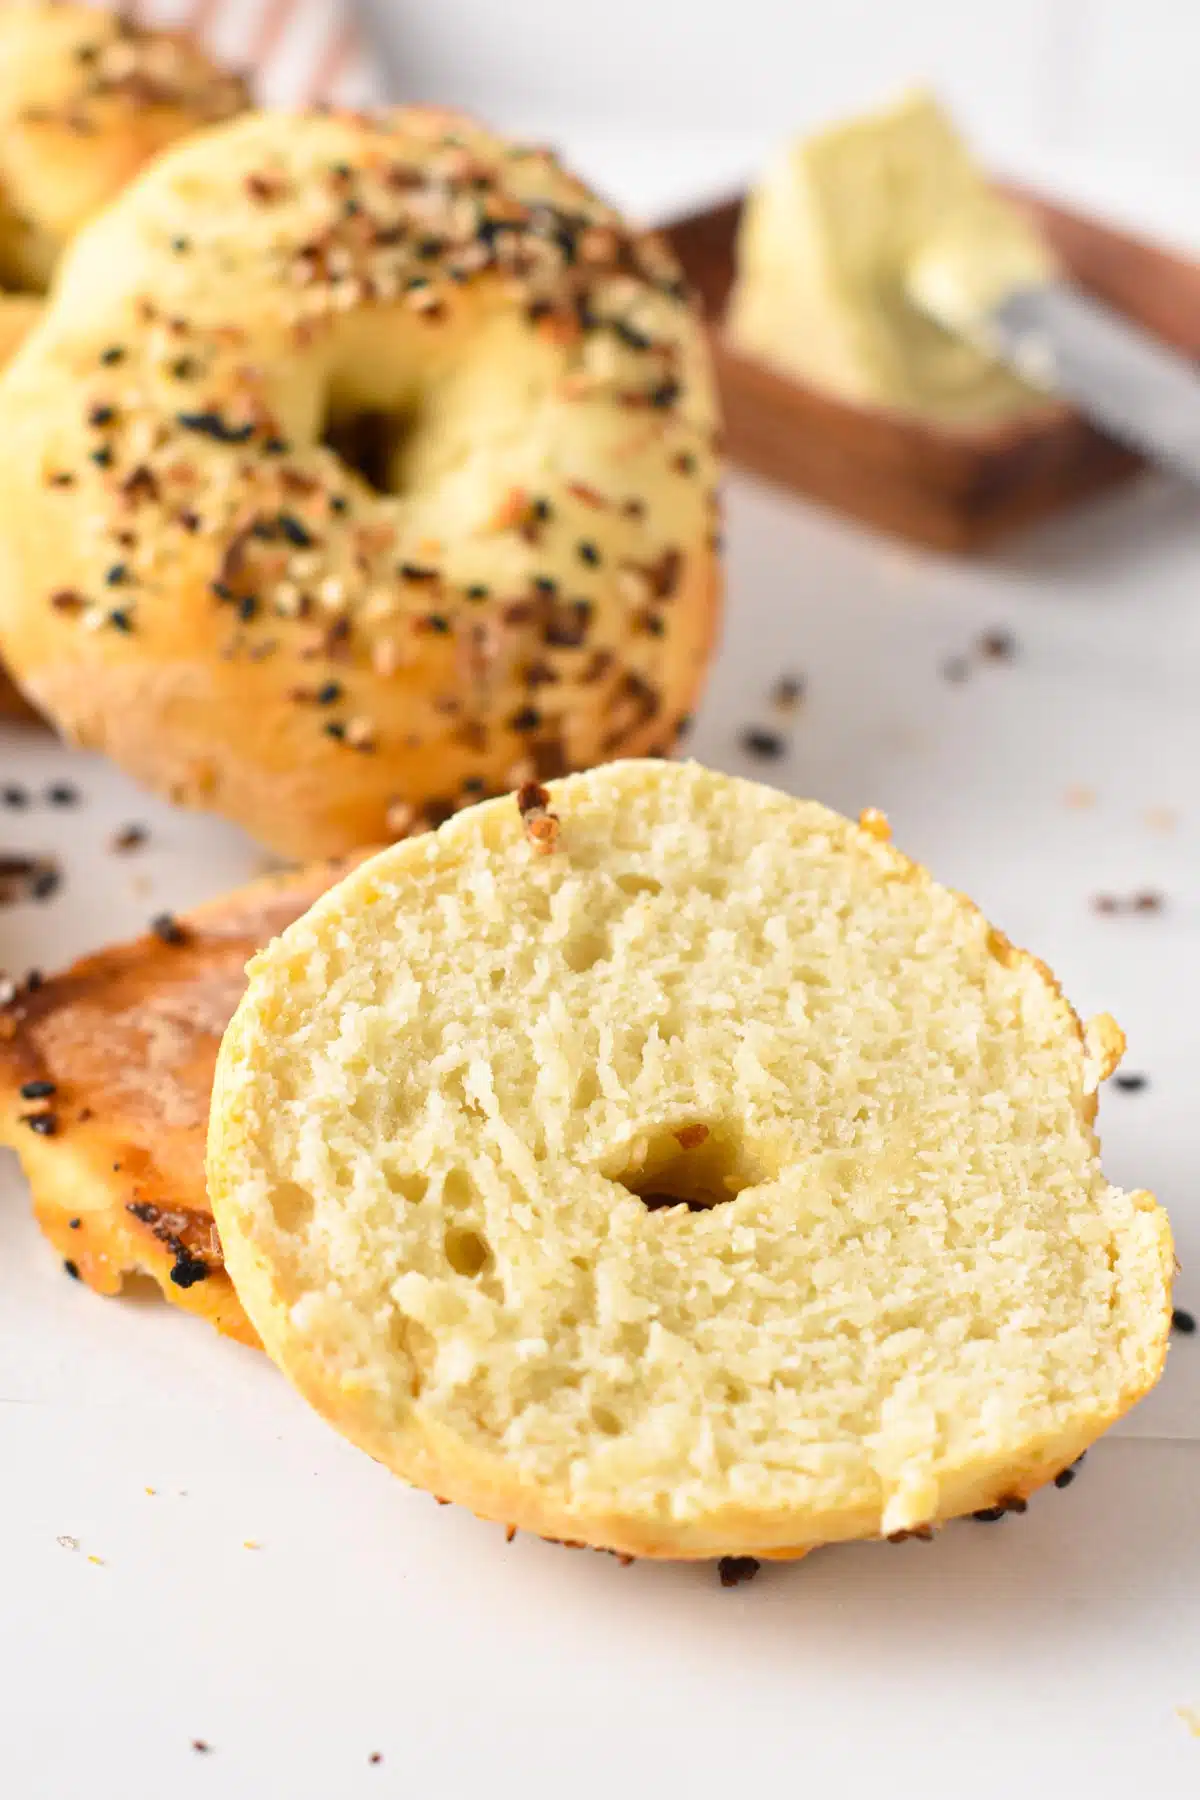 These 3 ingredient bagels is the most easy bagel recipe, no boiling needed and with a delicious chewy, soft texture. Plus, they are also high-protein and healthy for you made with only 3 simple wholesome ingredients.